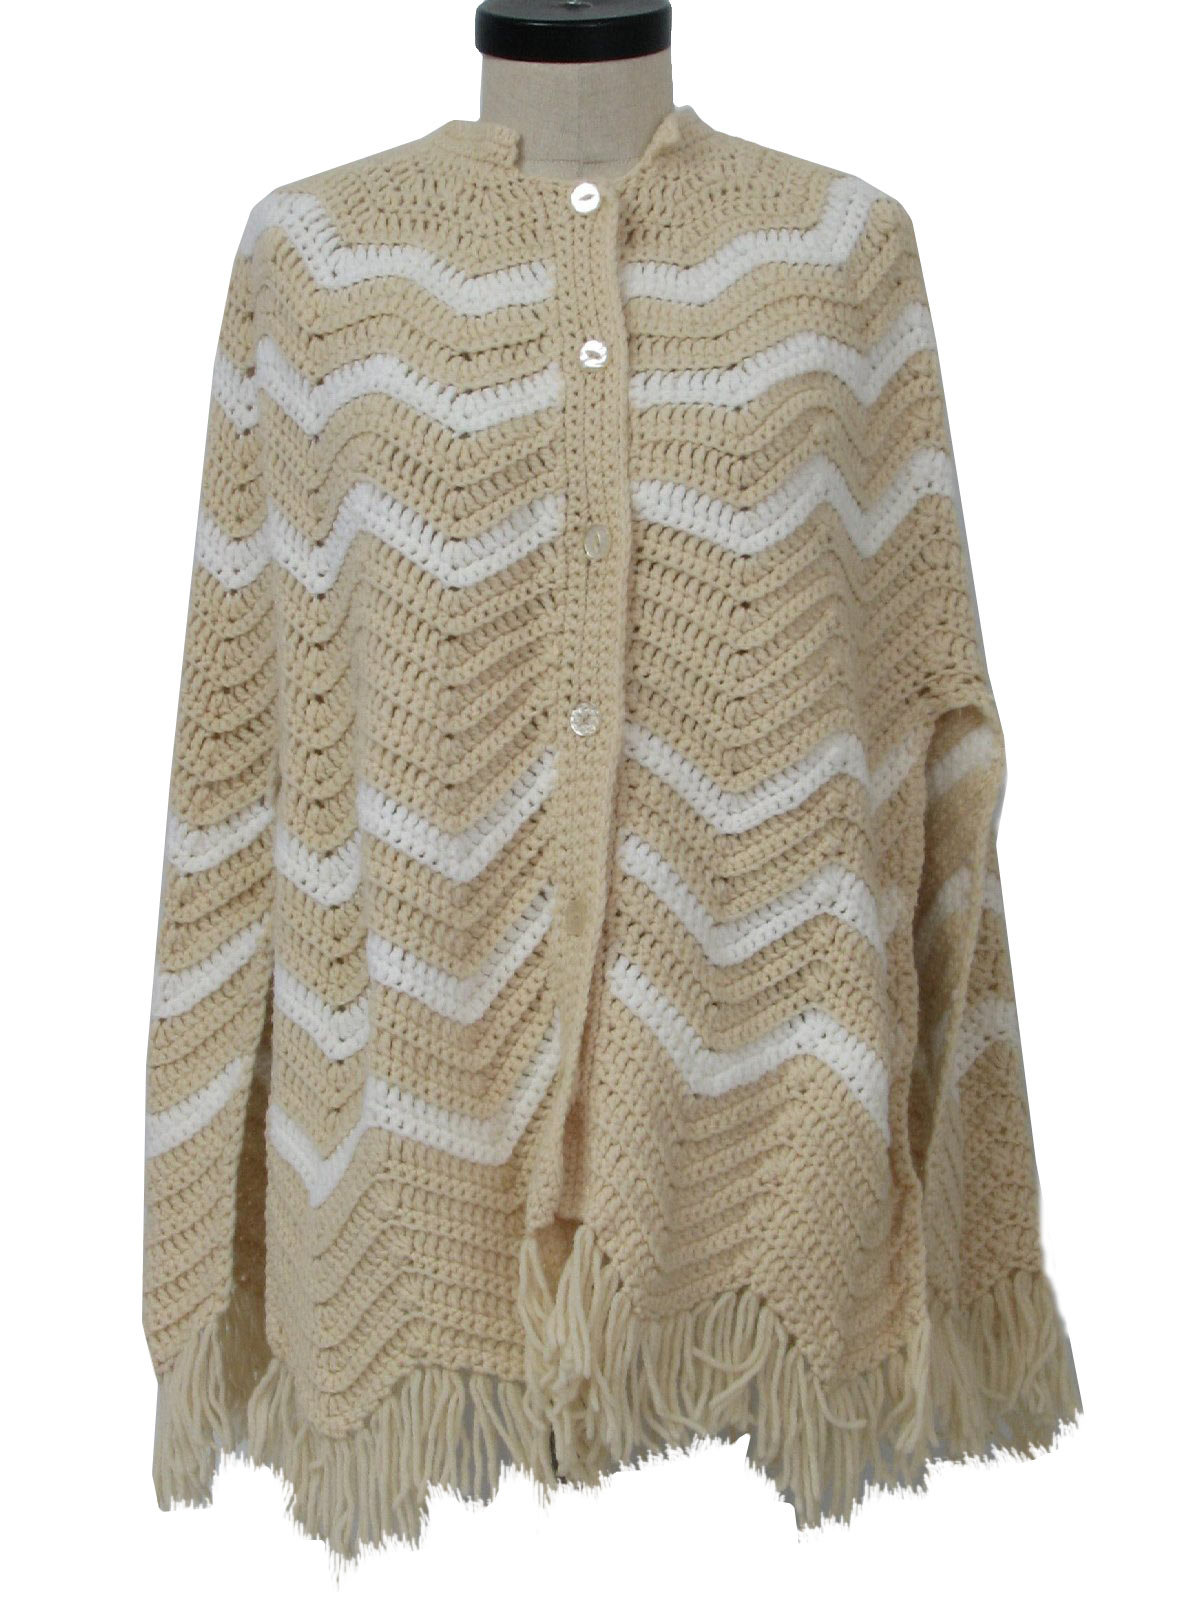 1970's Retro Sweater: 70s -Hand Knit- Womens white and light tan ...